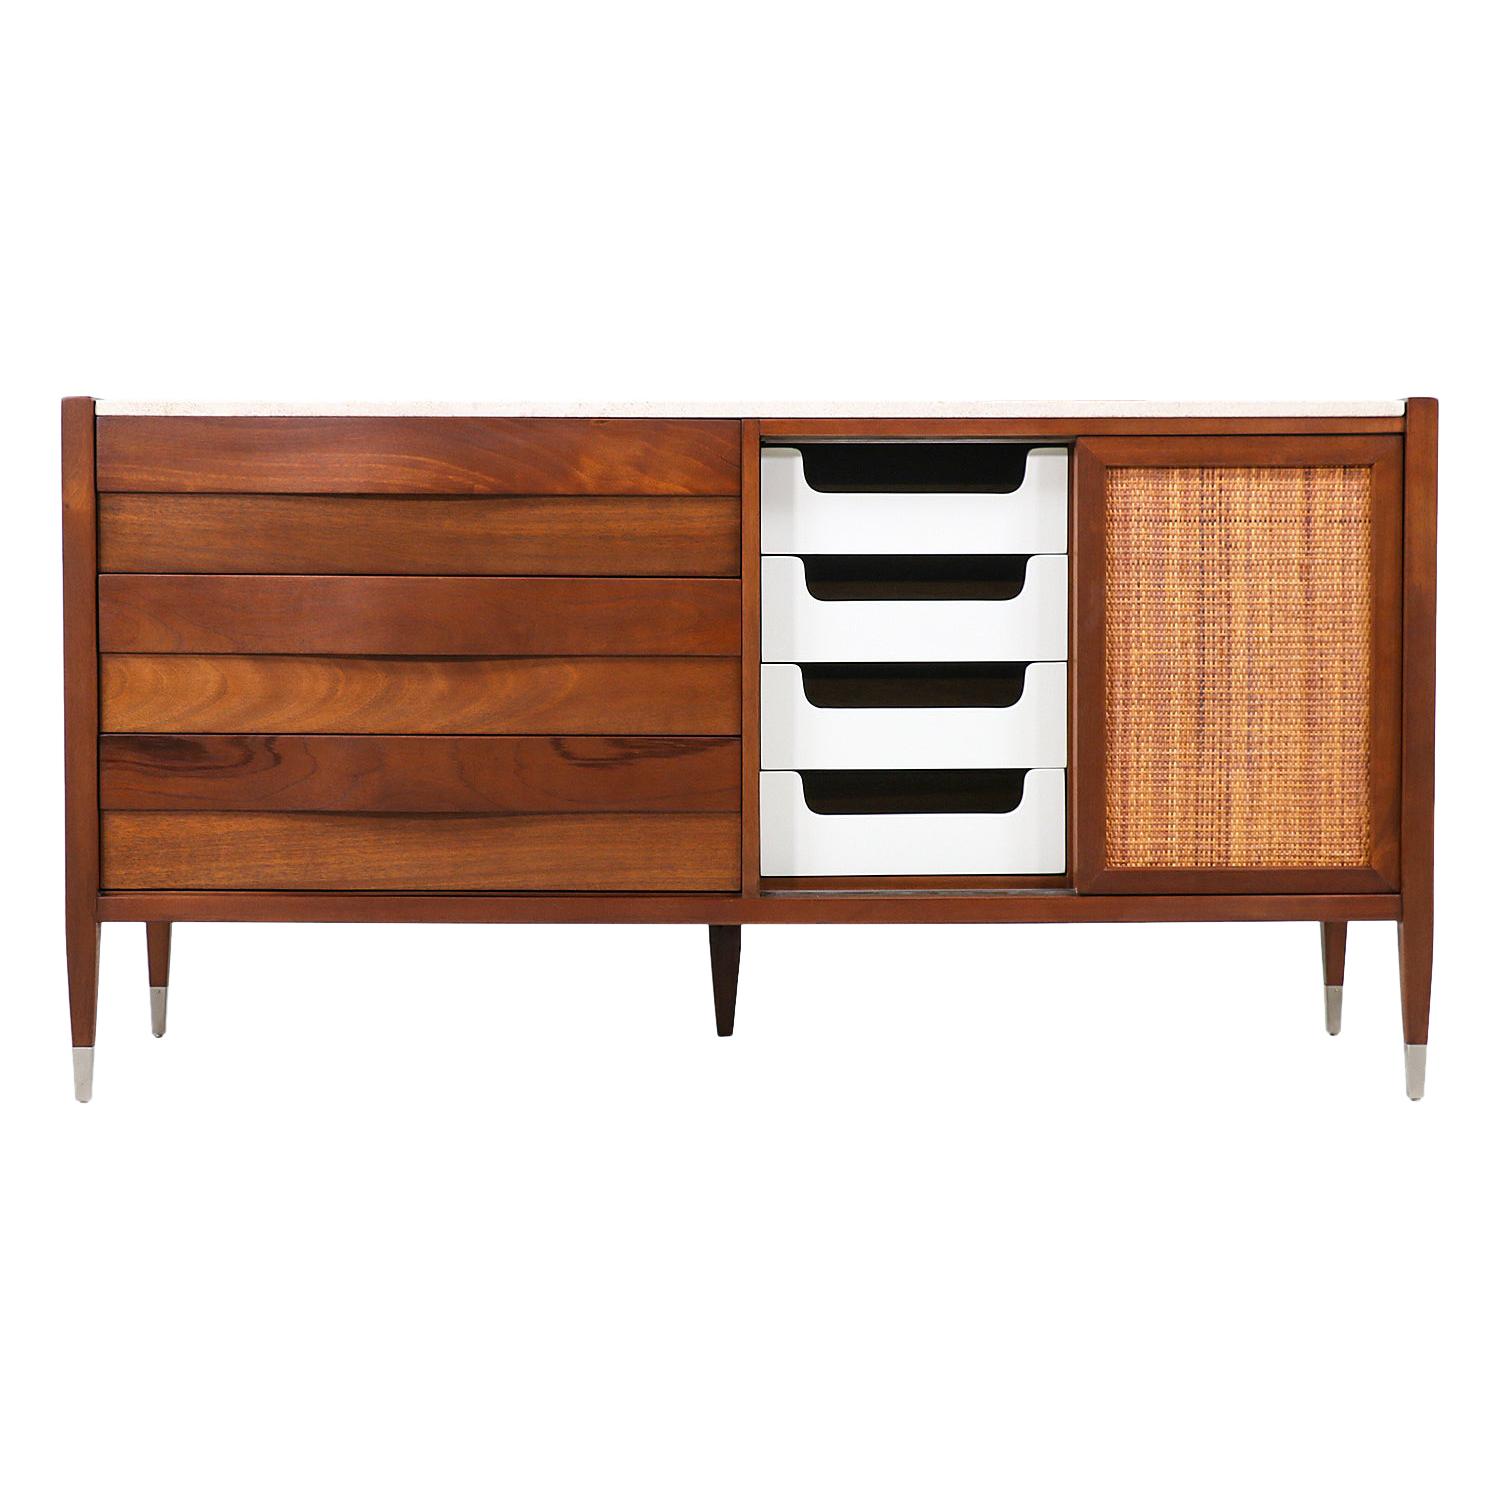 Mid-Century Modern Walnut and Brass Credenza with Travertine Top at 1stDibs